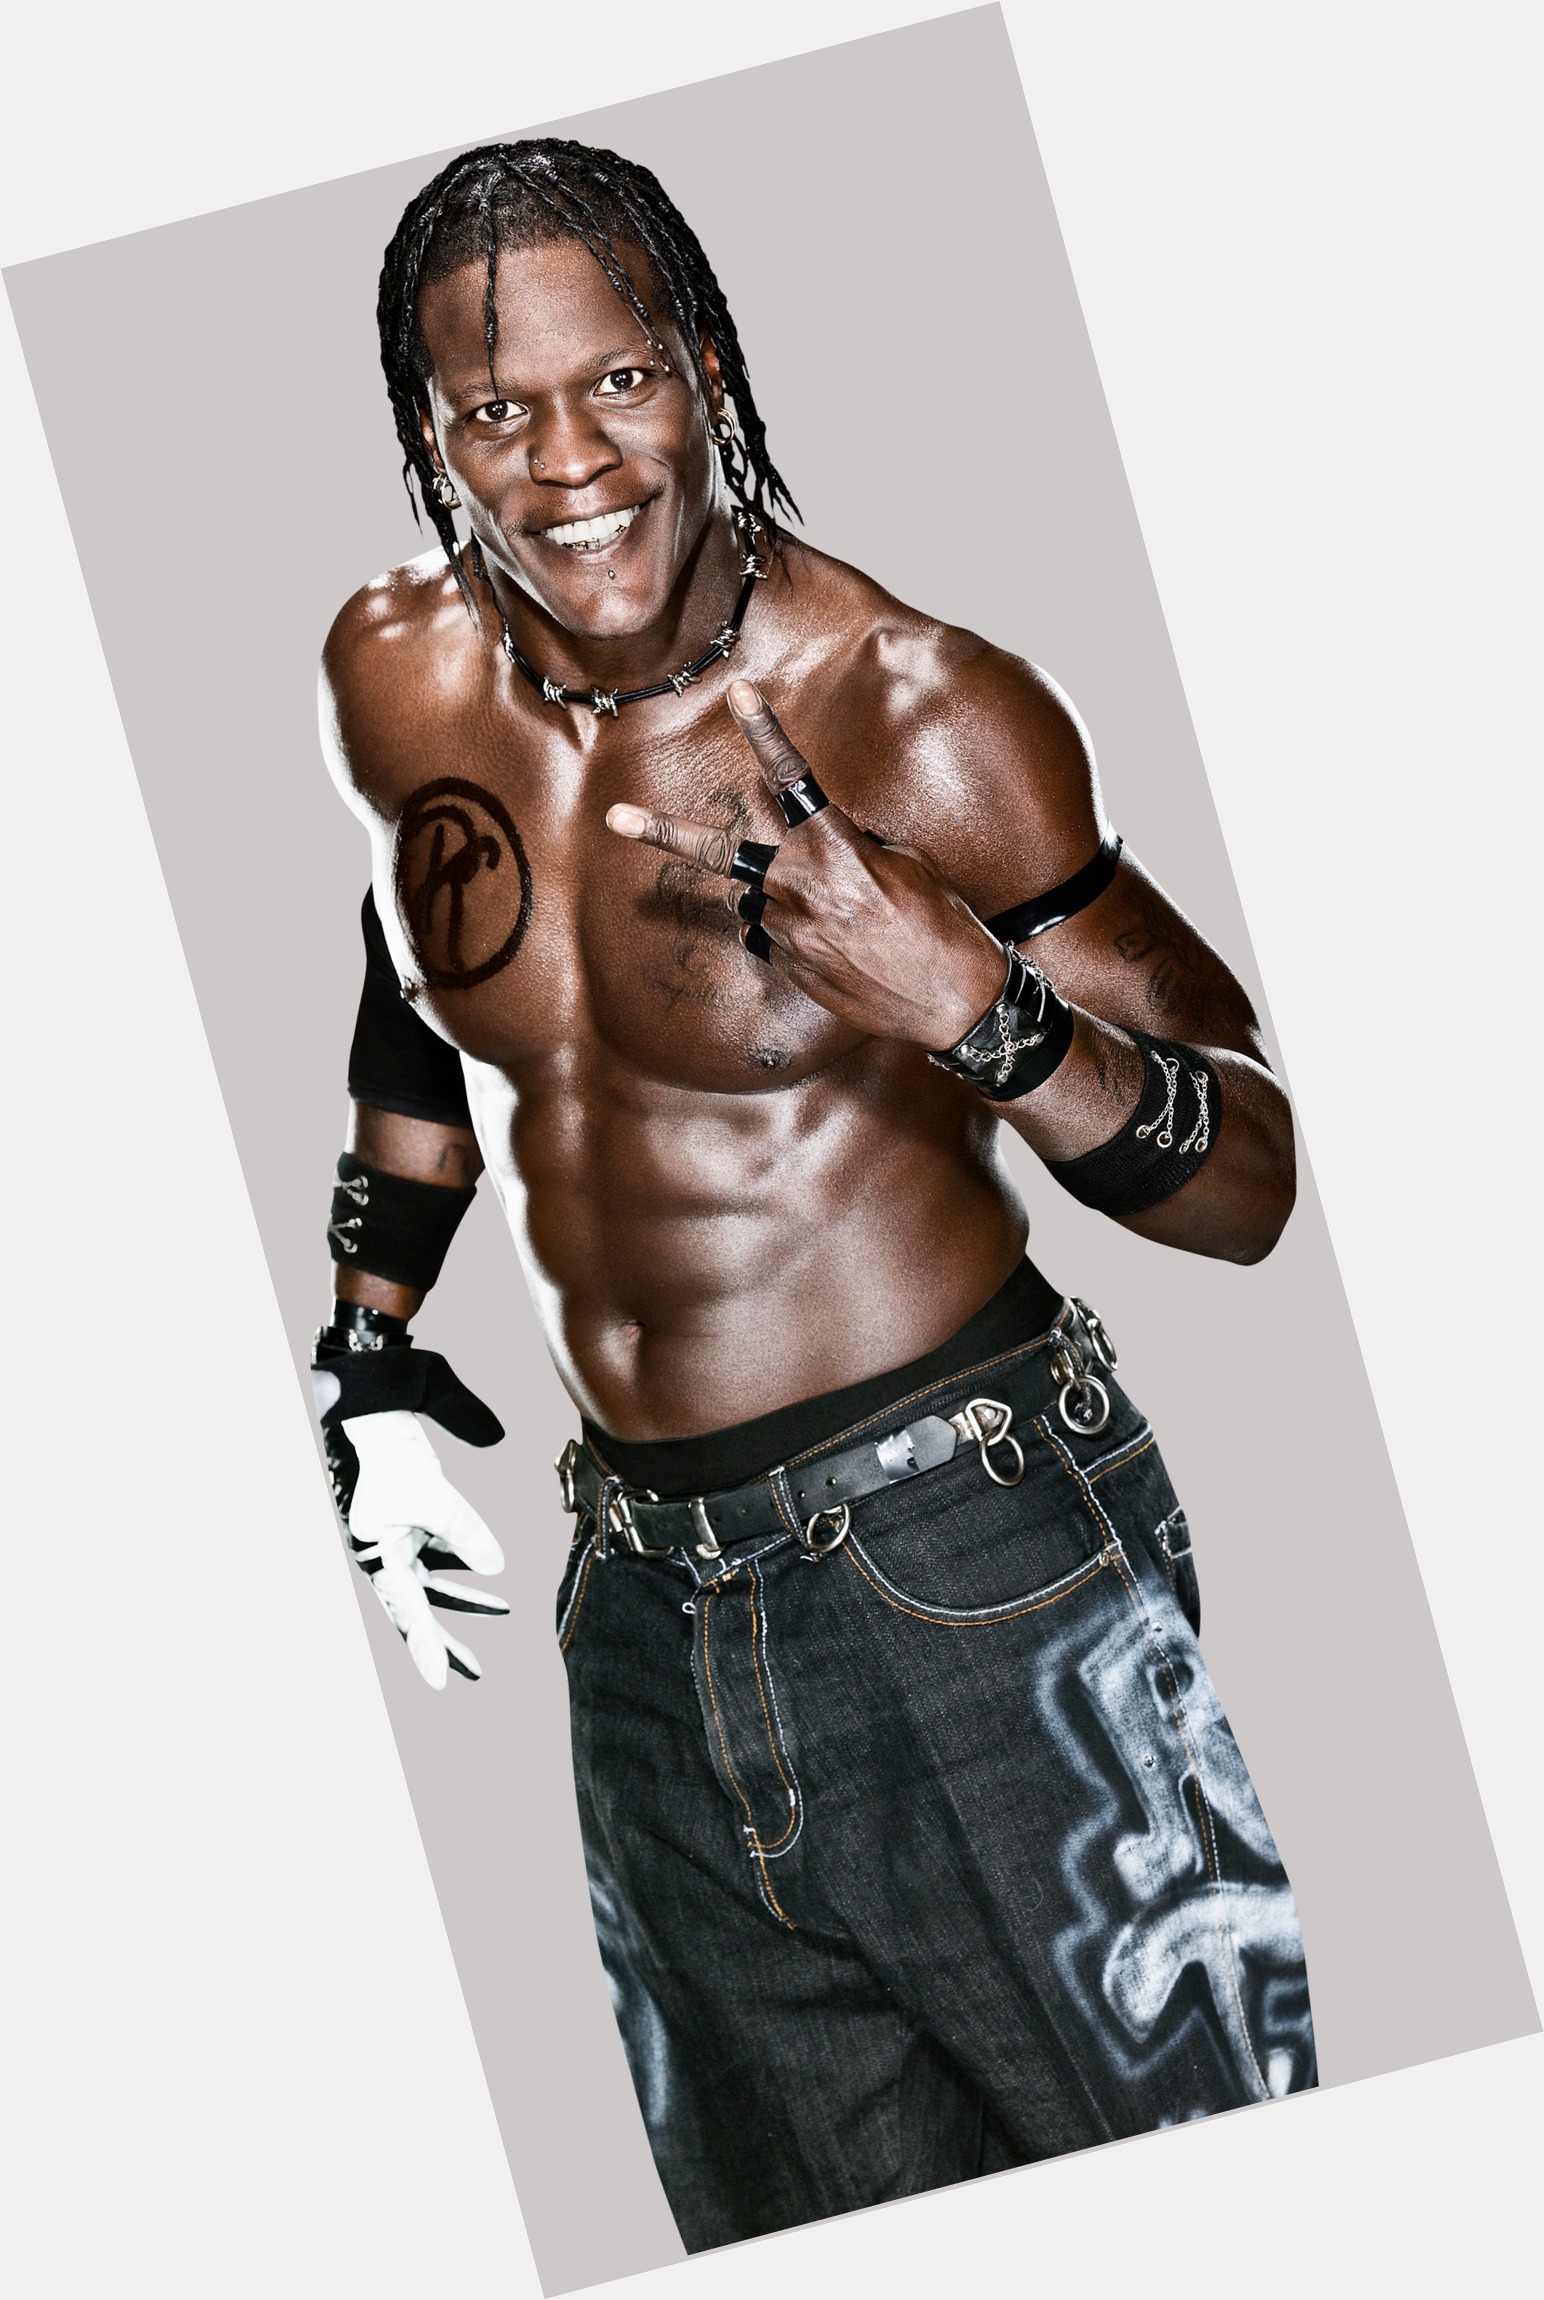 <a href="/hot-men/r-truth/is-he-ron-killings-married">R-Truth</a> Athletic body,  black hair & hairstyles